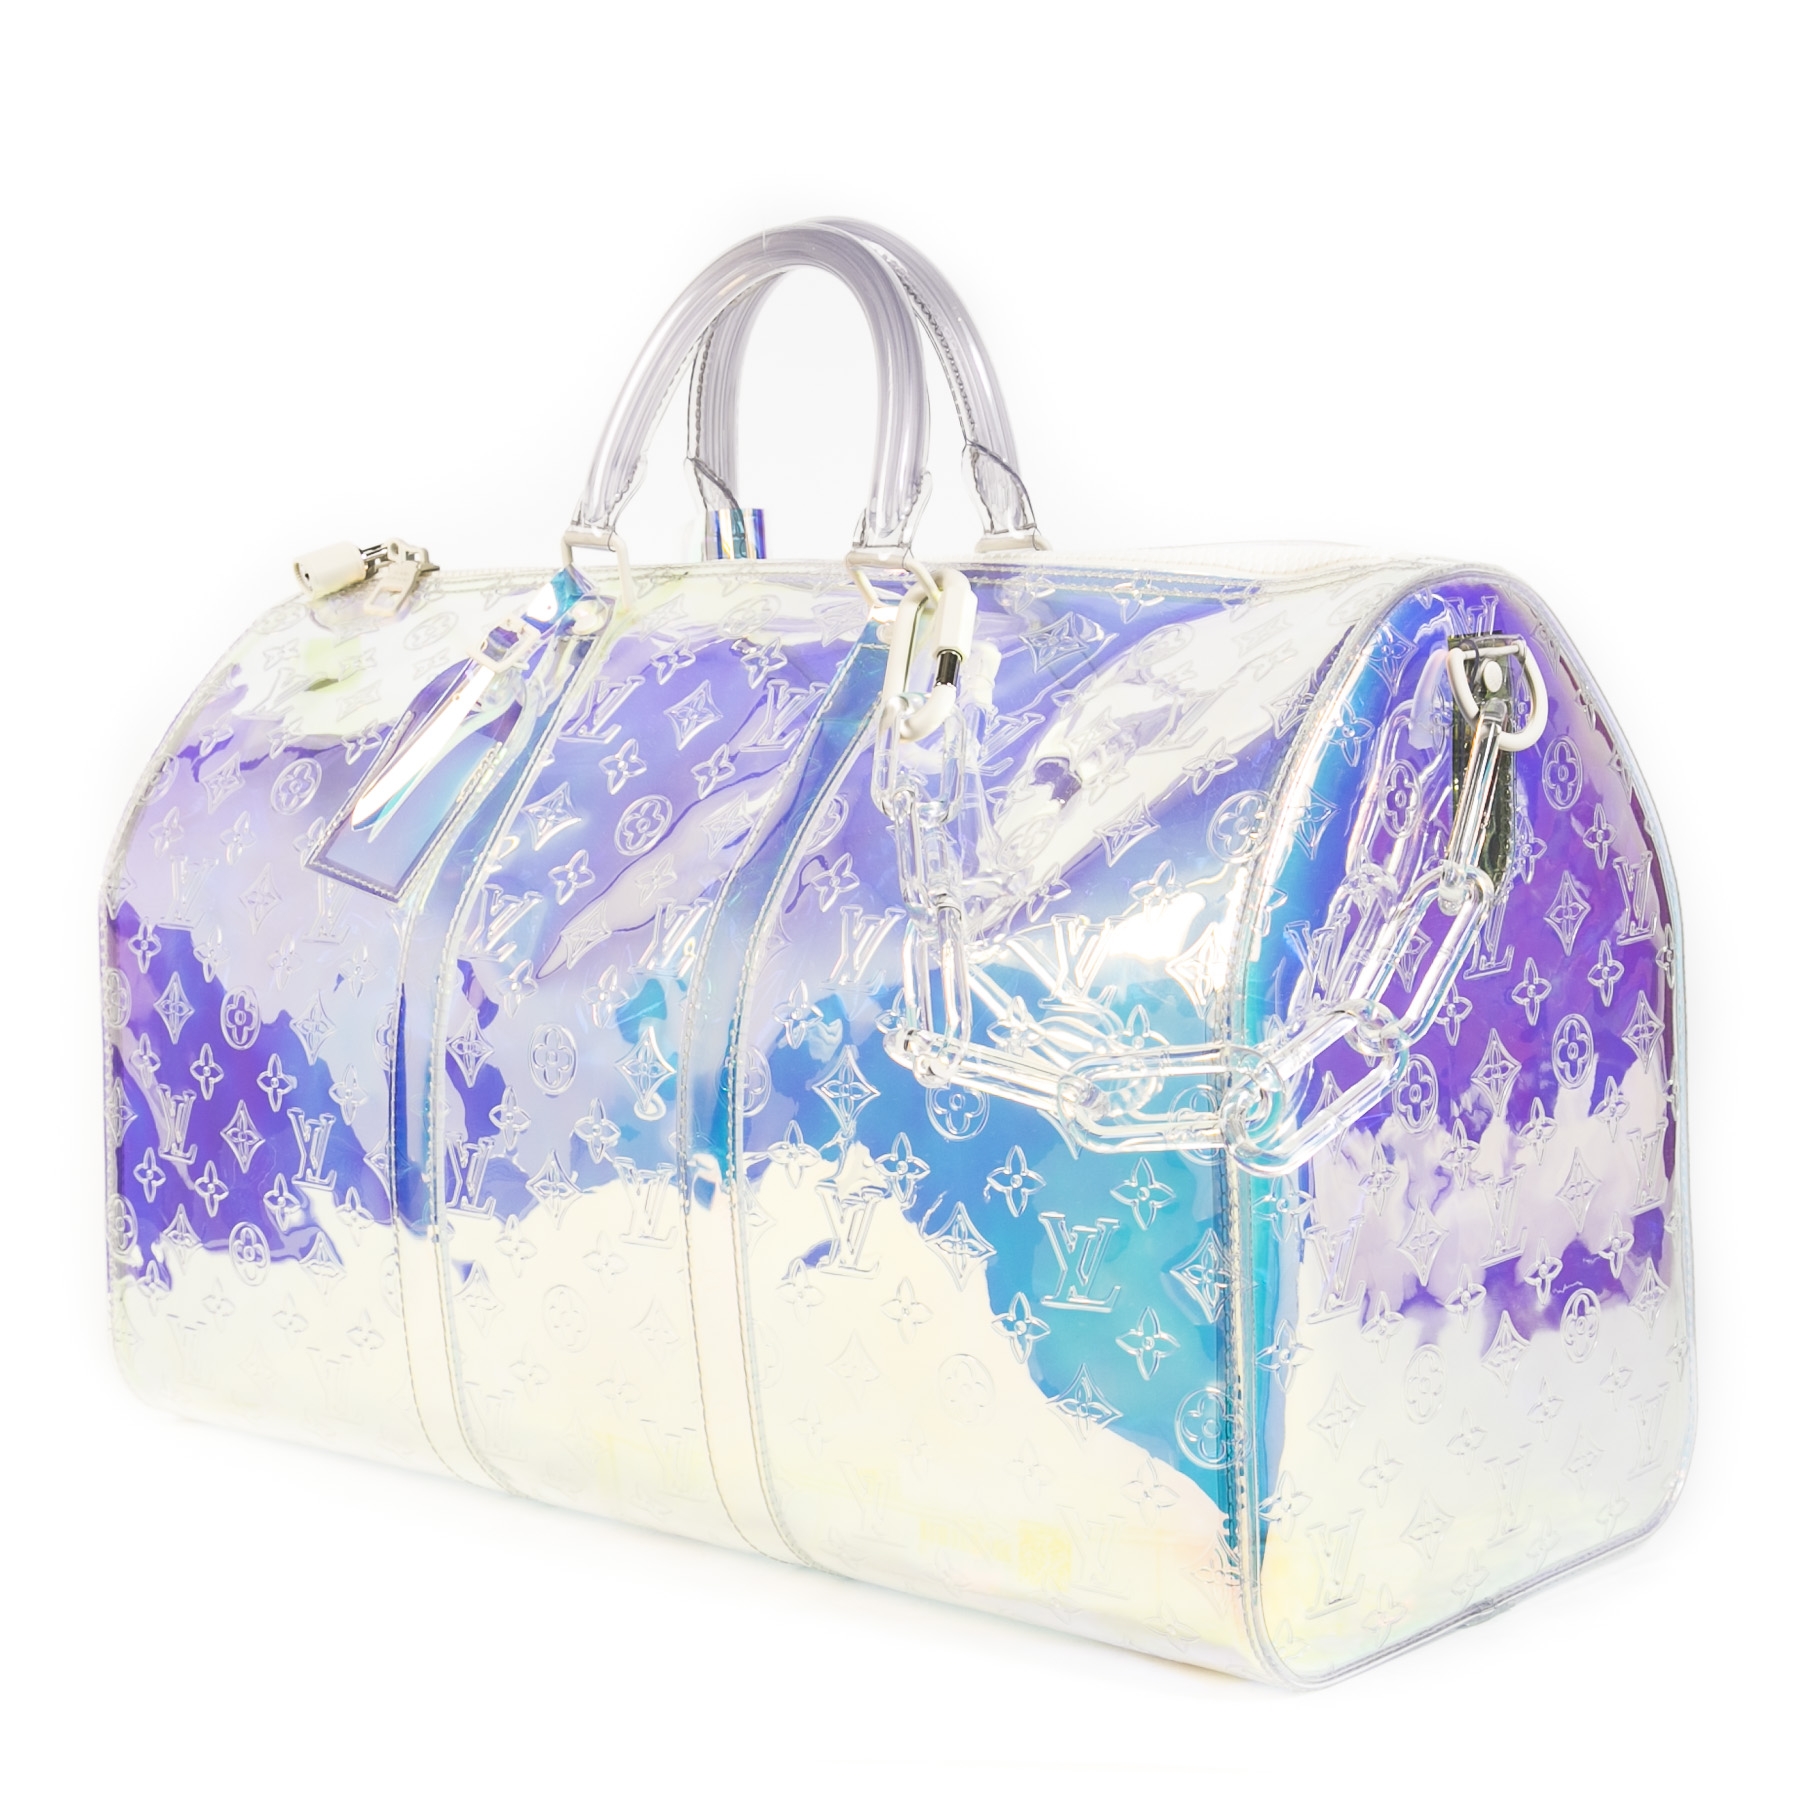 Louis Vuitton Keepall Ss19 Hologram Prism 50 Bandouliere 870370 Travel Bag  For Sale at 1stDibs